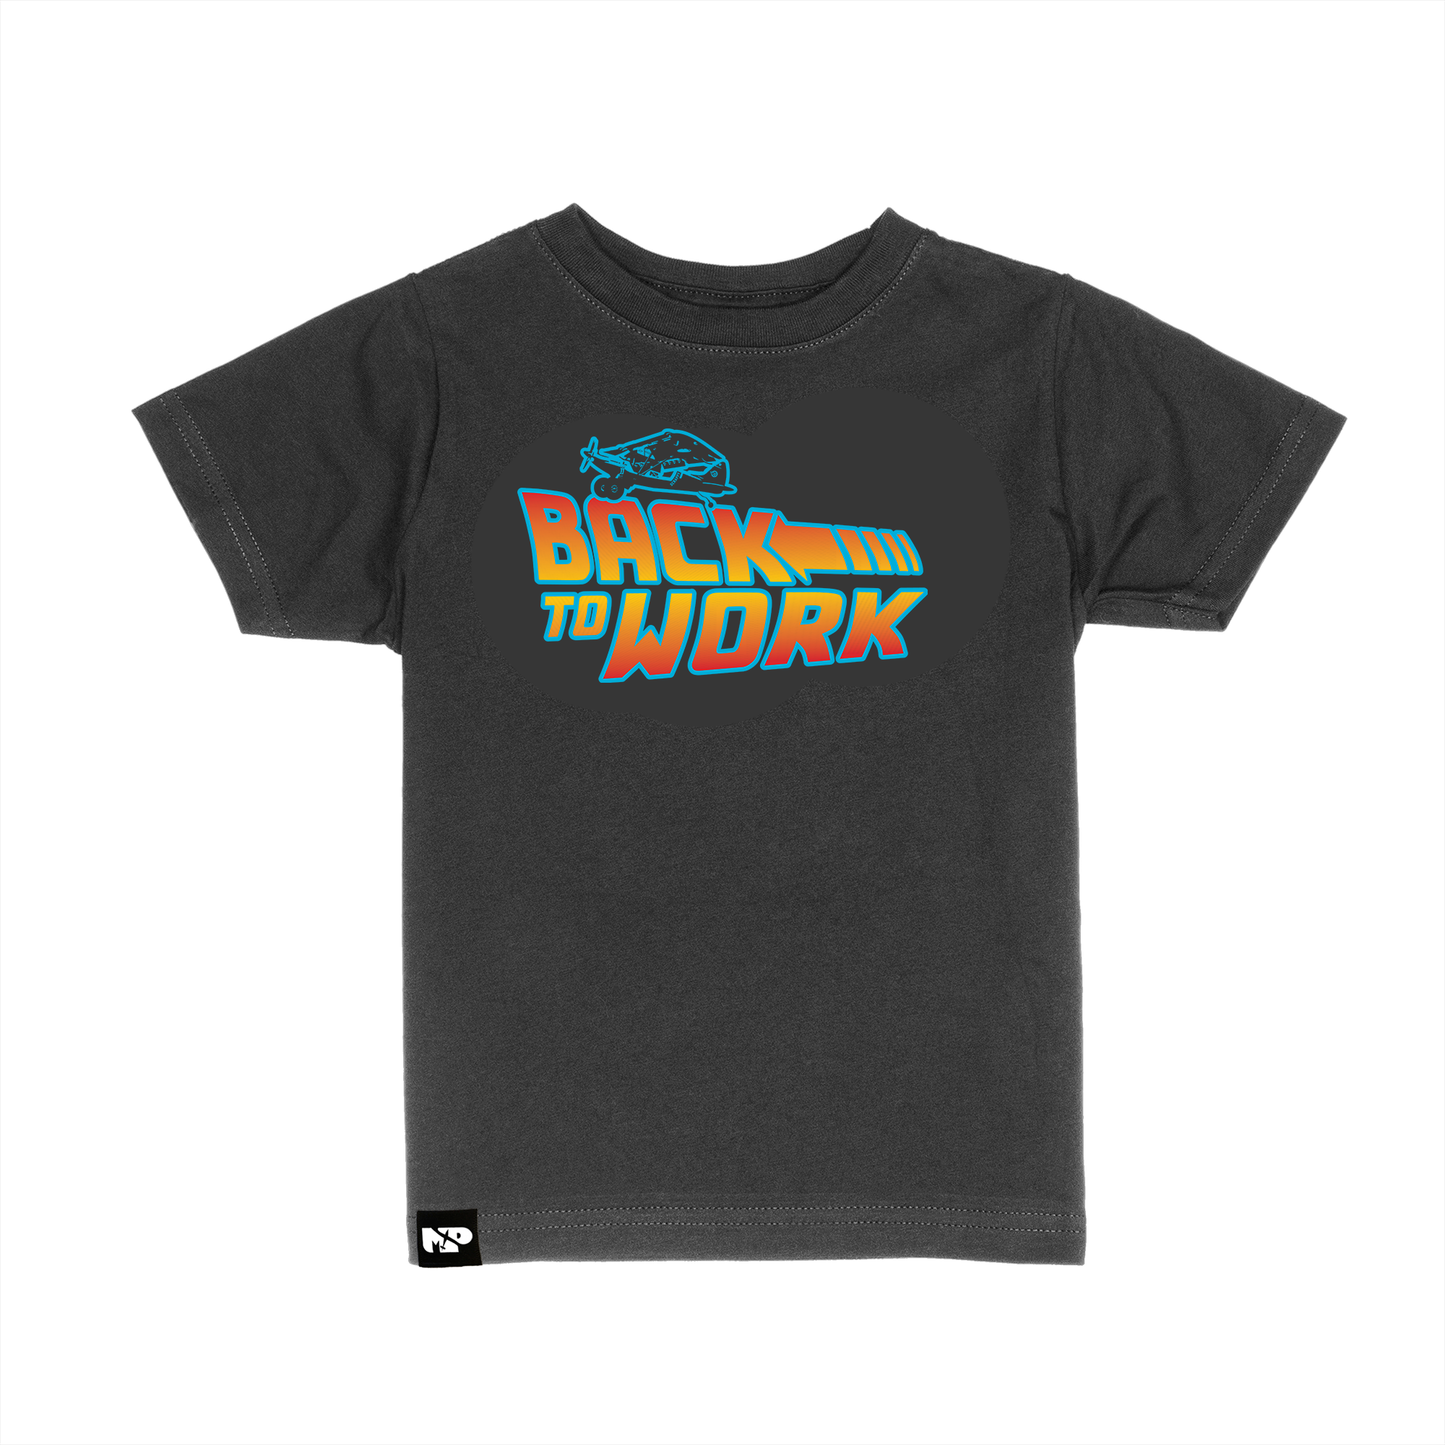 Back to Work Youth T Shirt